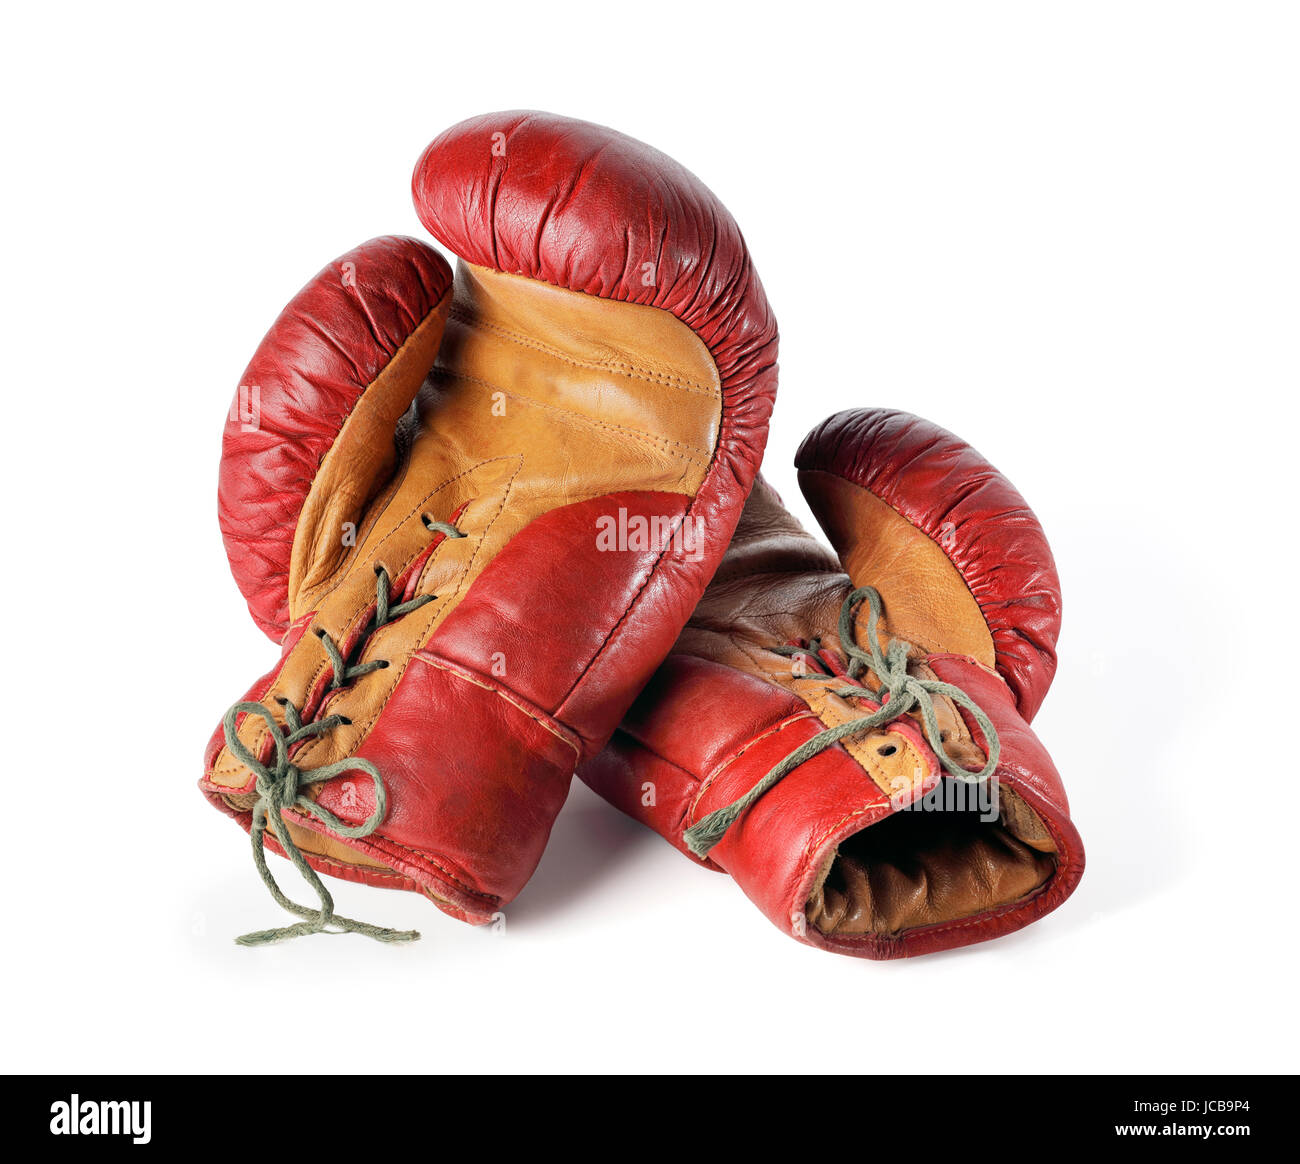 Old red leather boxing gloves isolated on white. Stock Photo